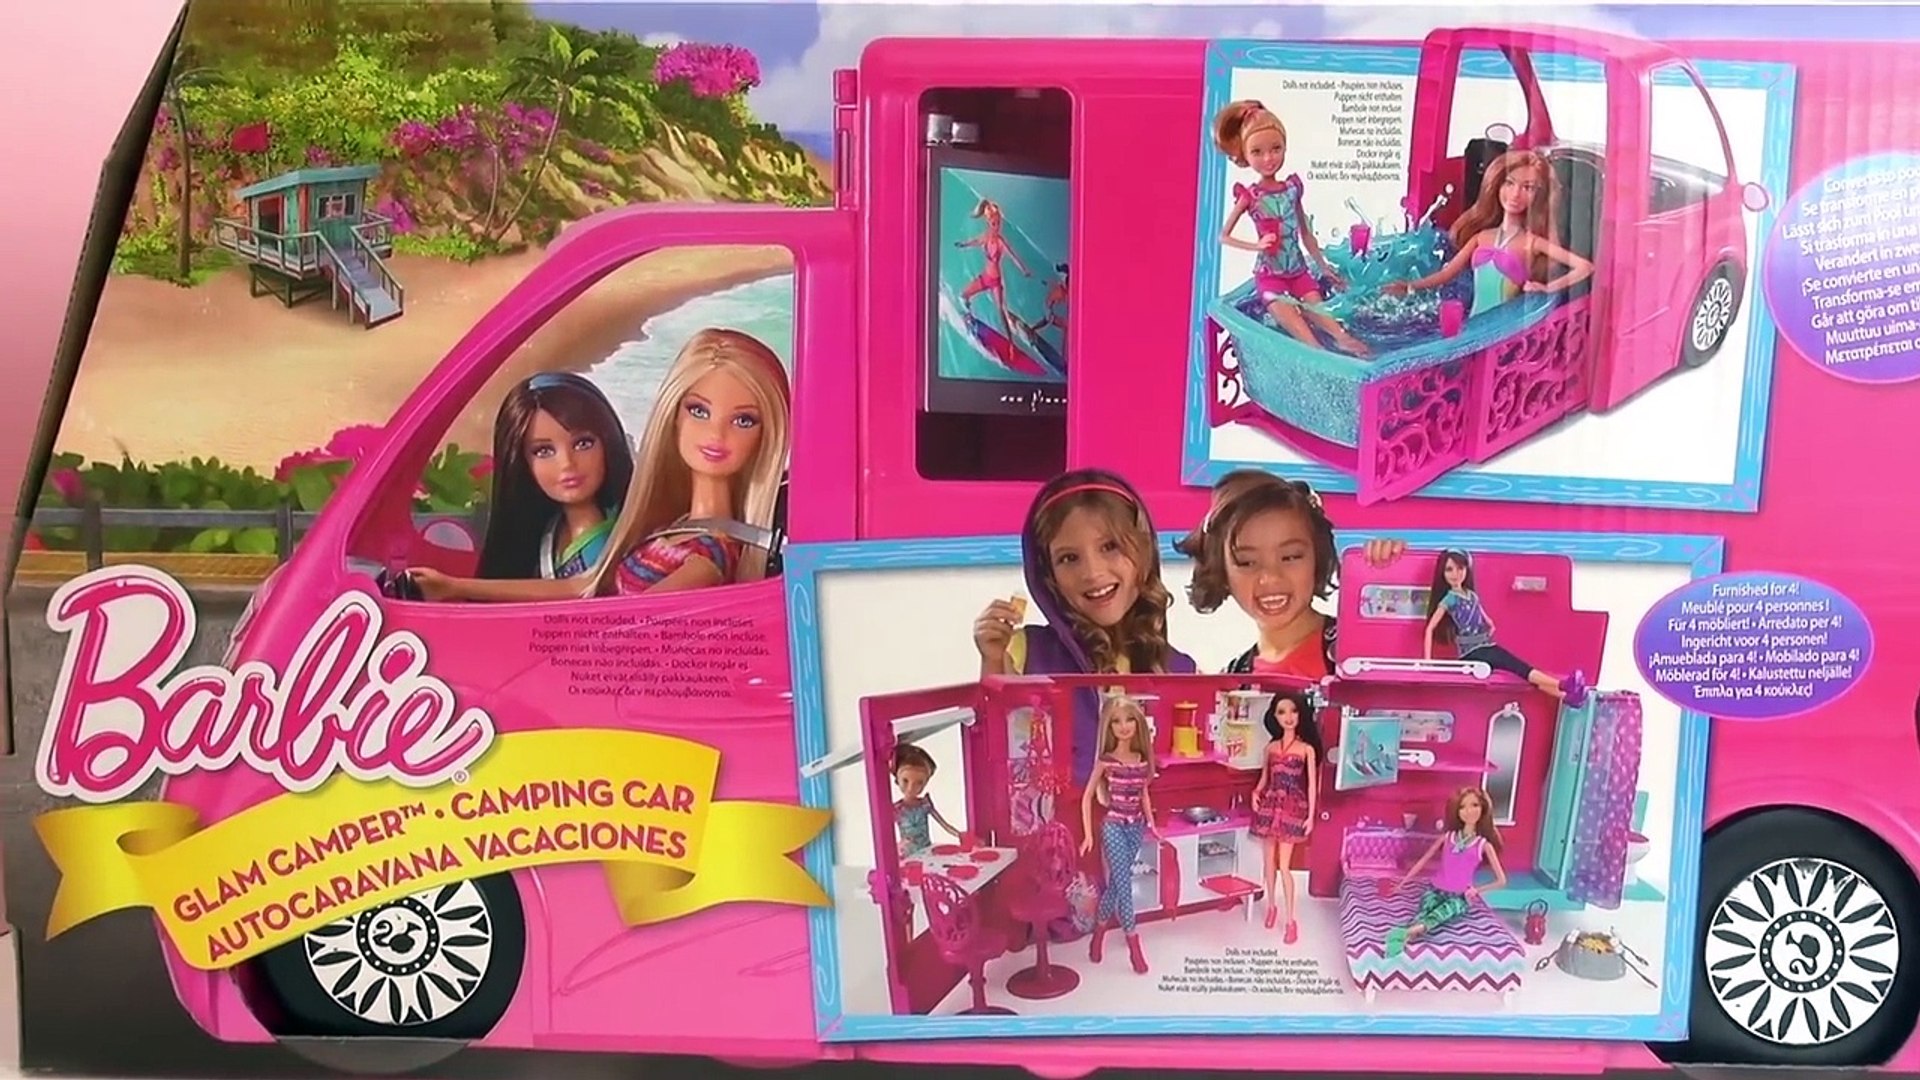 Barbie glam camper swimming pool review français – Le gigantesque camping-car  Barbie Unboxing - video Dailymotion